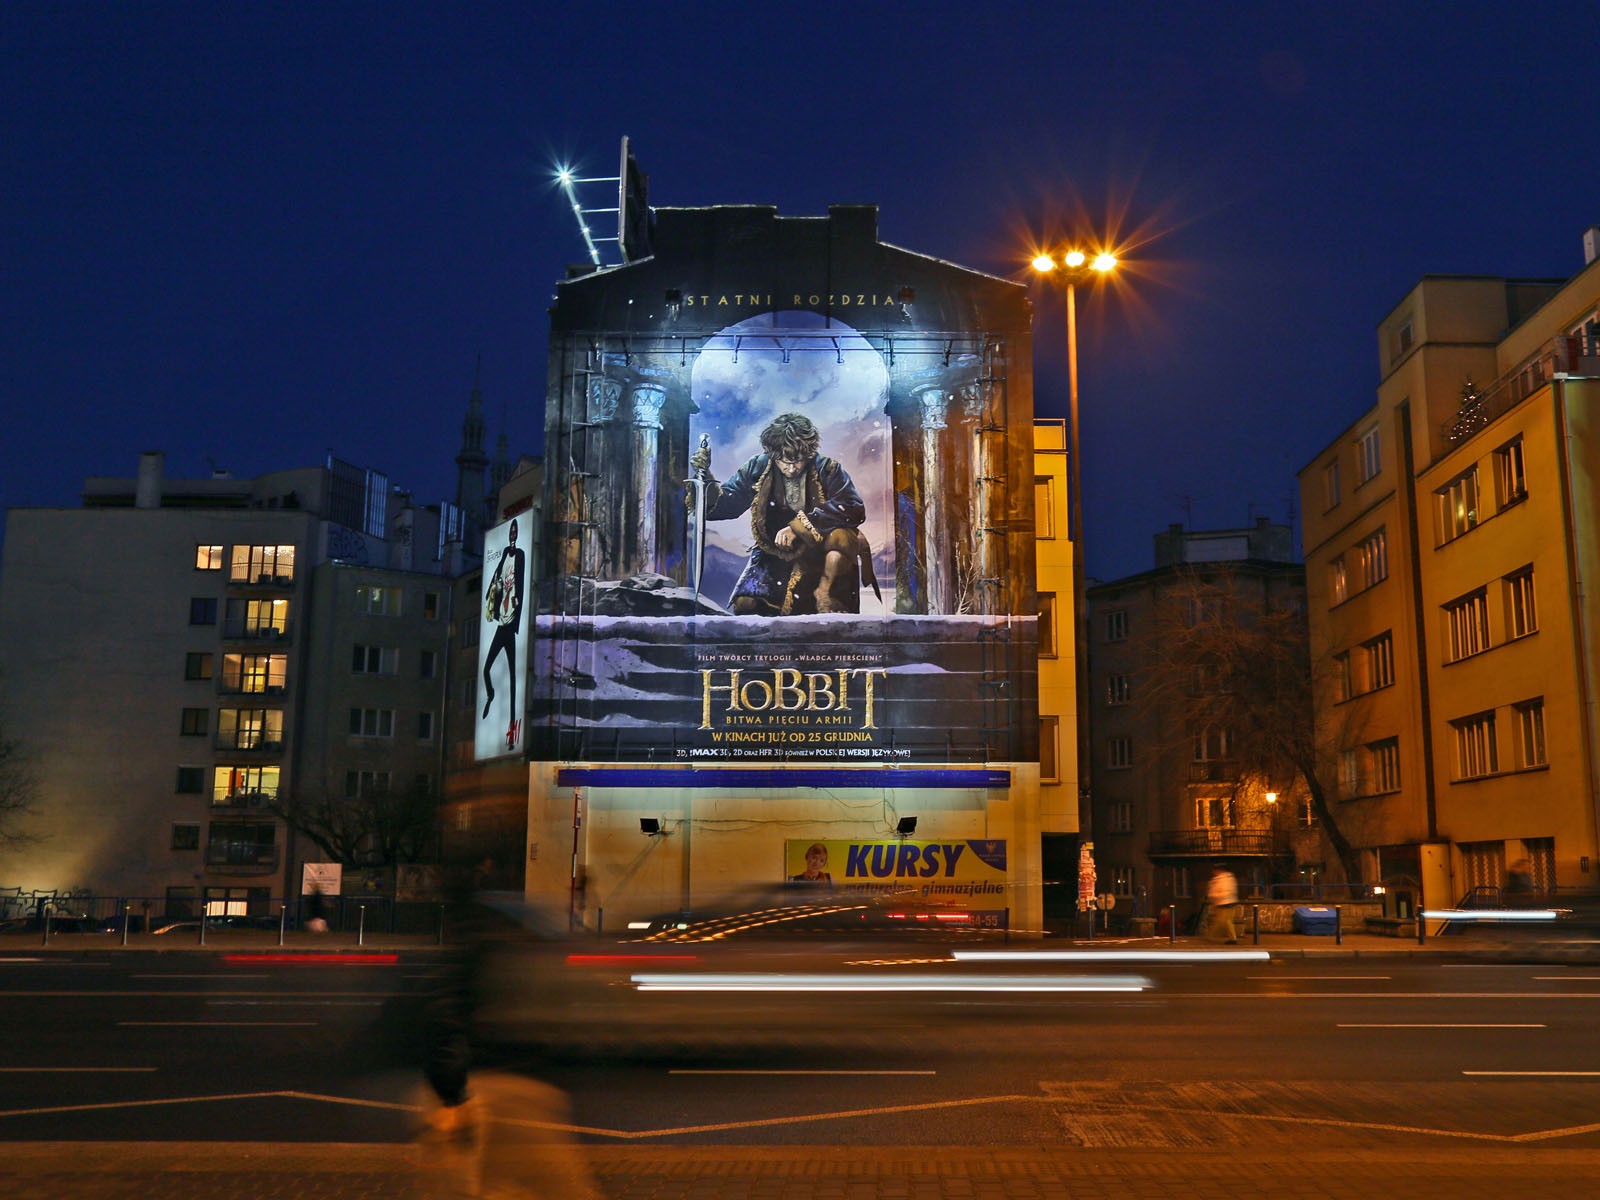 The Hobbit: The Battle of the Five Armies movie large format advertisement Forum Films in Warsaw | The Hobbit: The Battle of the Five Armies | Portfolio